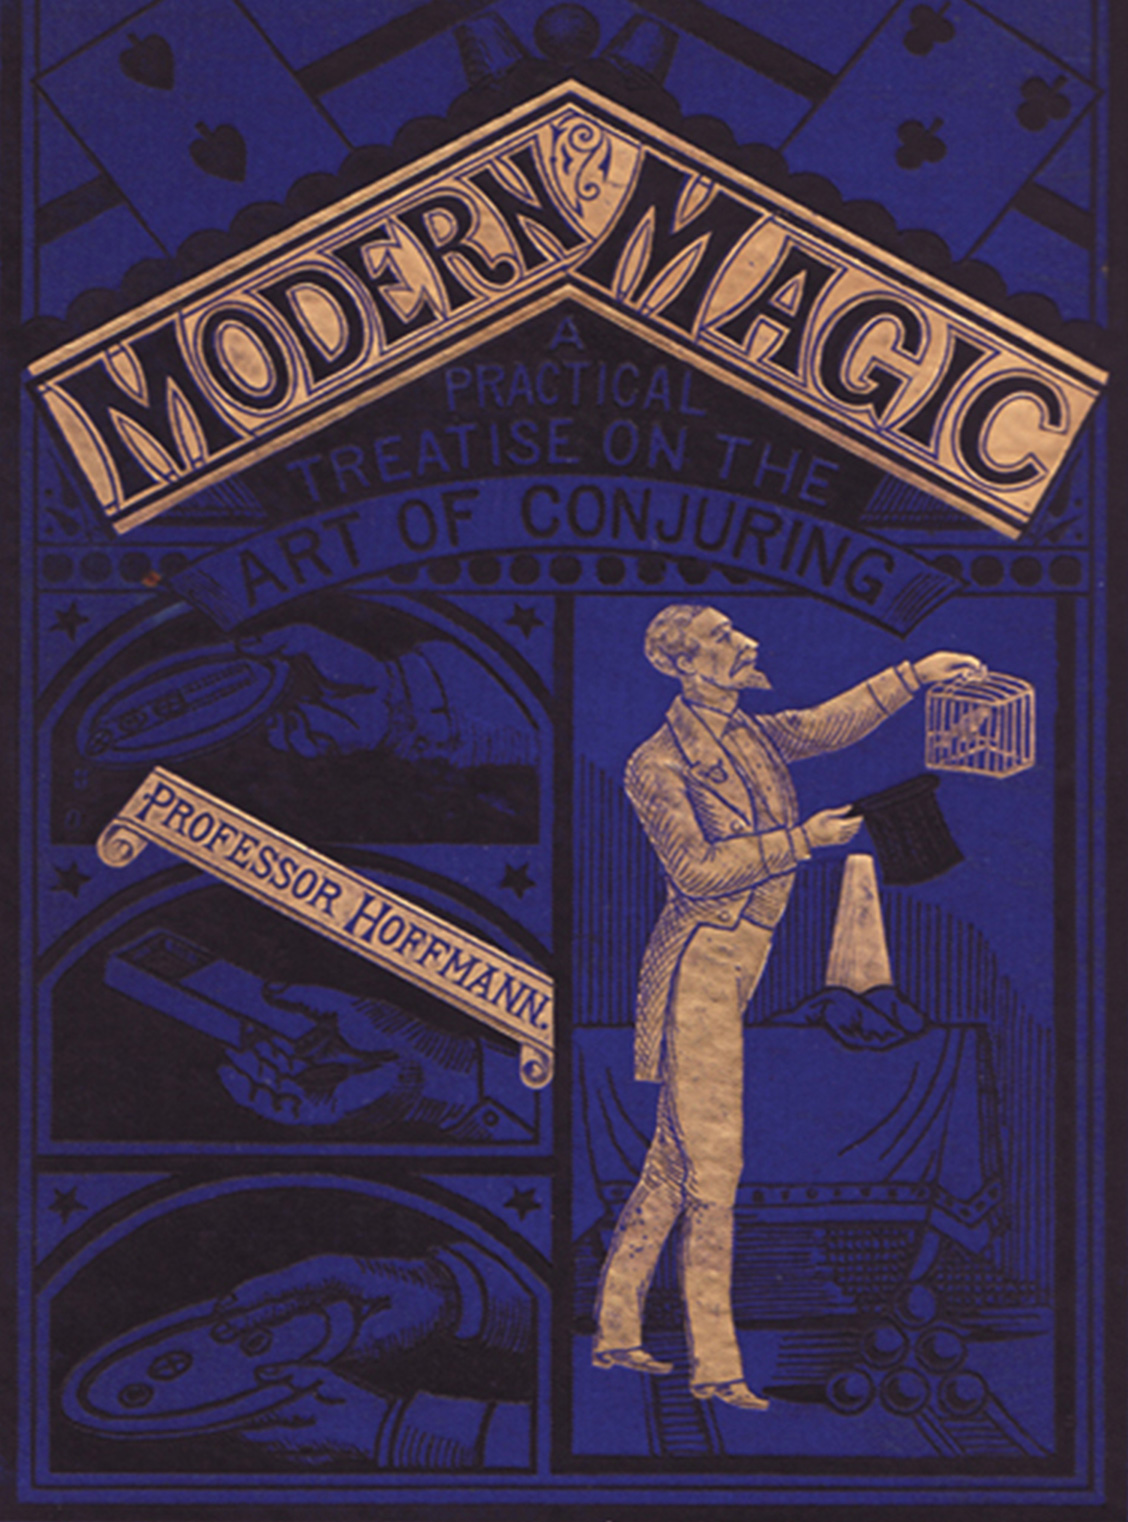 Modern Magic (1876), by British magician
Professor Hoffmann (Angelo Lewis). The
publication of this popular how-to book
caused an outcry among magicians, who
believed it jeopardized their livelihood.
Hoffmann gifted this copy to his wife, with
the dedication, “To my Queen of Hearts
from her own peculiar Wizard.” Courtesy
The Magic Circle Library, London.